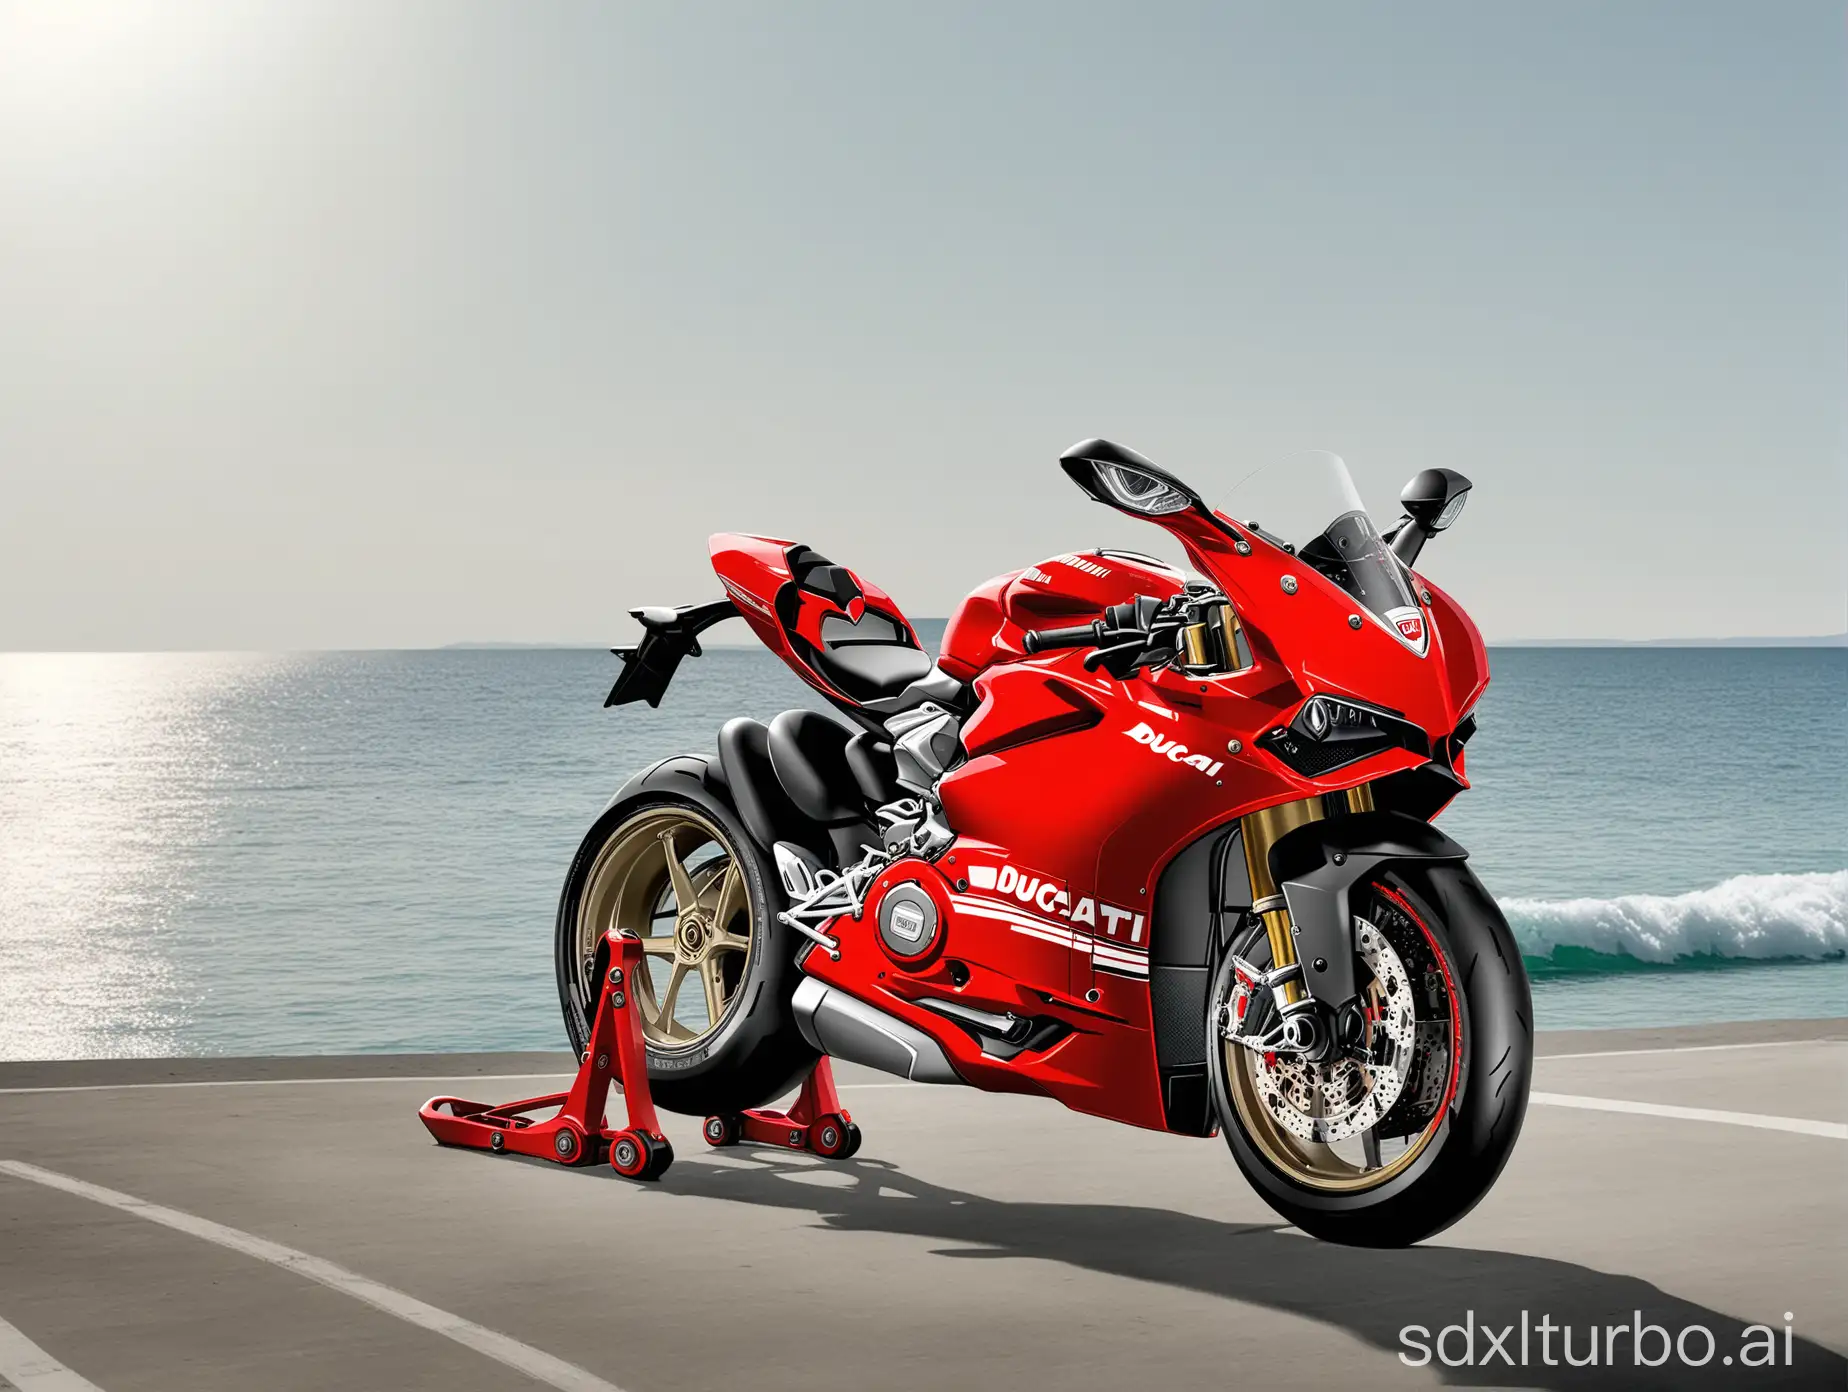 There is a motorcycle by the sea and the motorcycle is Ducati Panigale V4 R.